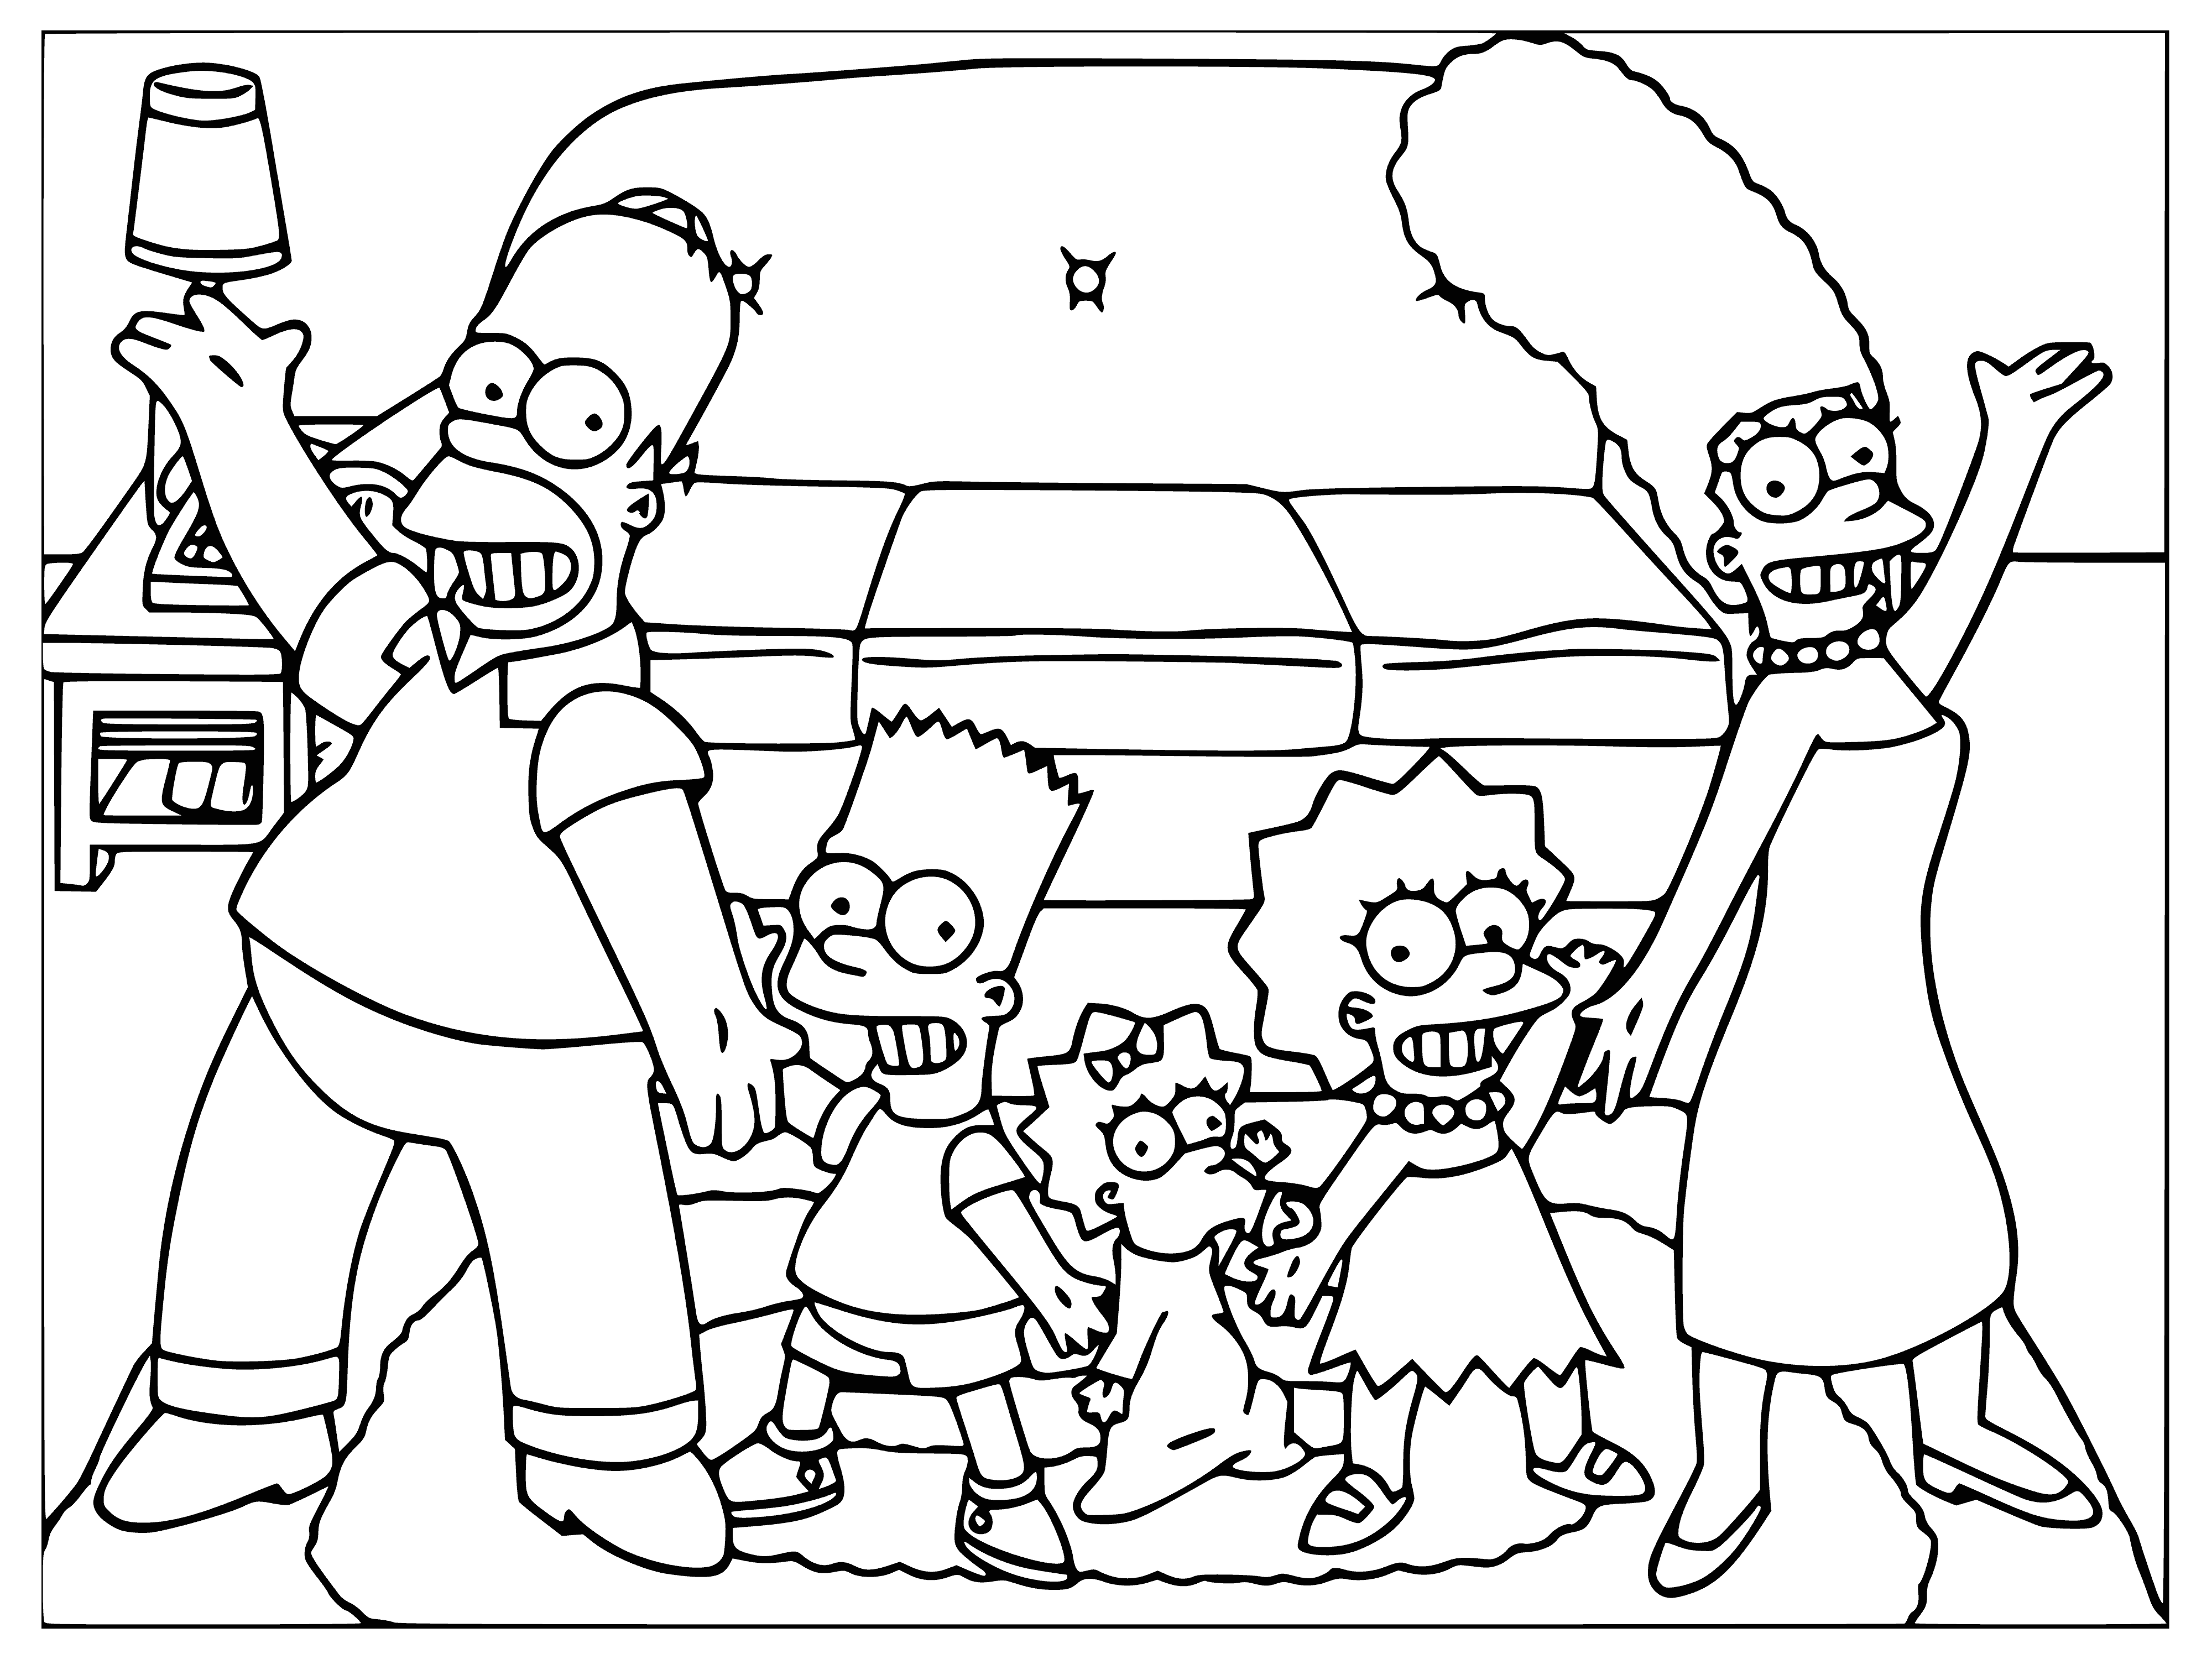 coloring page: The Simpsons is an iconic nuclear family of 5 with Homer as a working dad, Marge as mom, Bart the troublemaker, Lisa the straight-A student & Maggie the baby. #TVFamilies